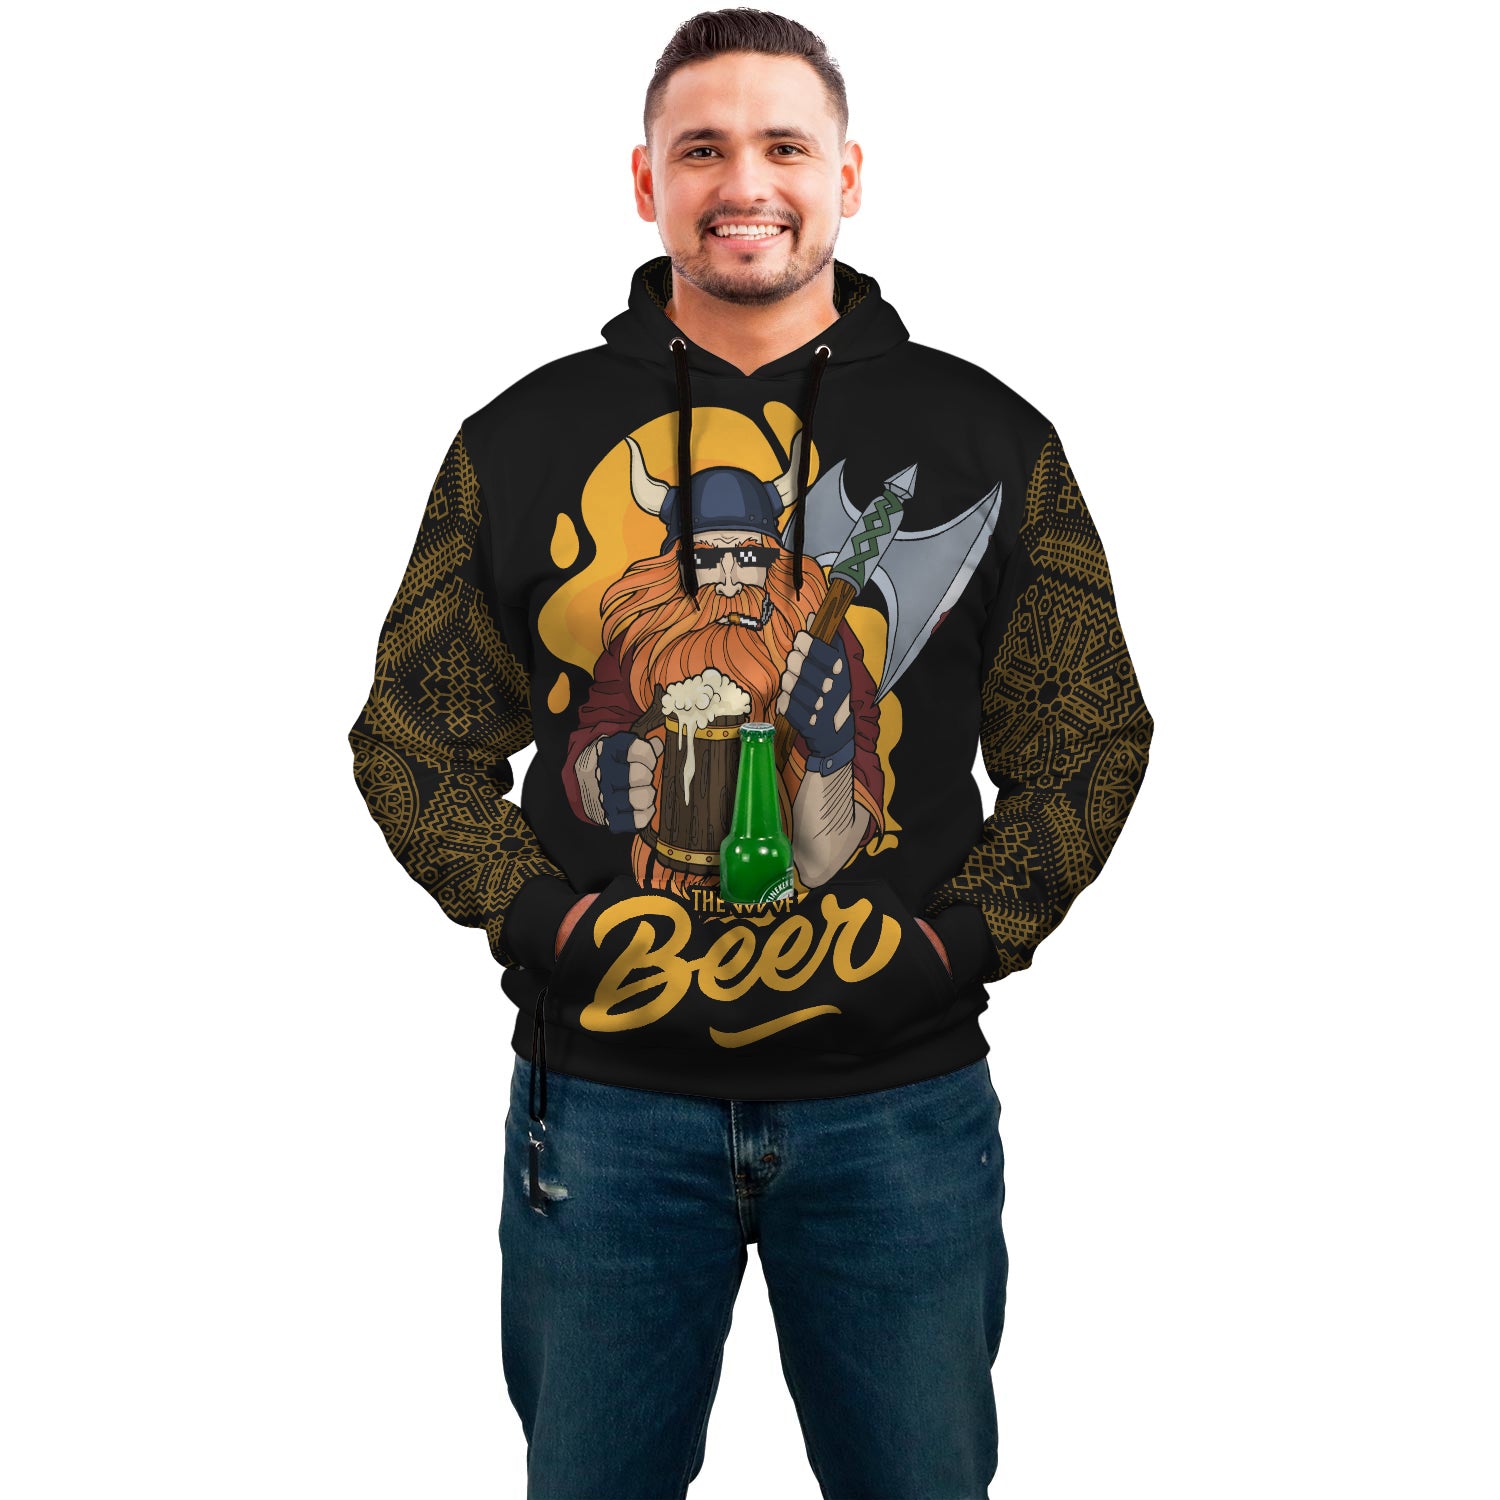 The God of Beer Hoodie - Perfenq